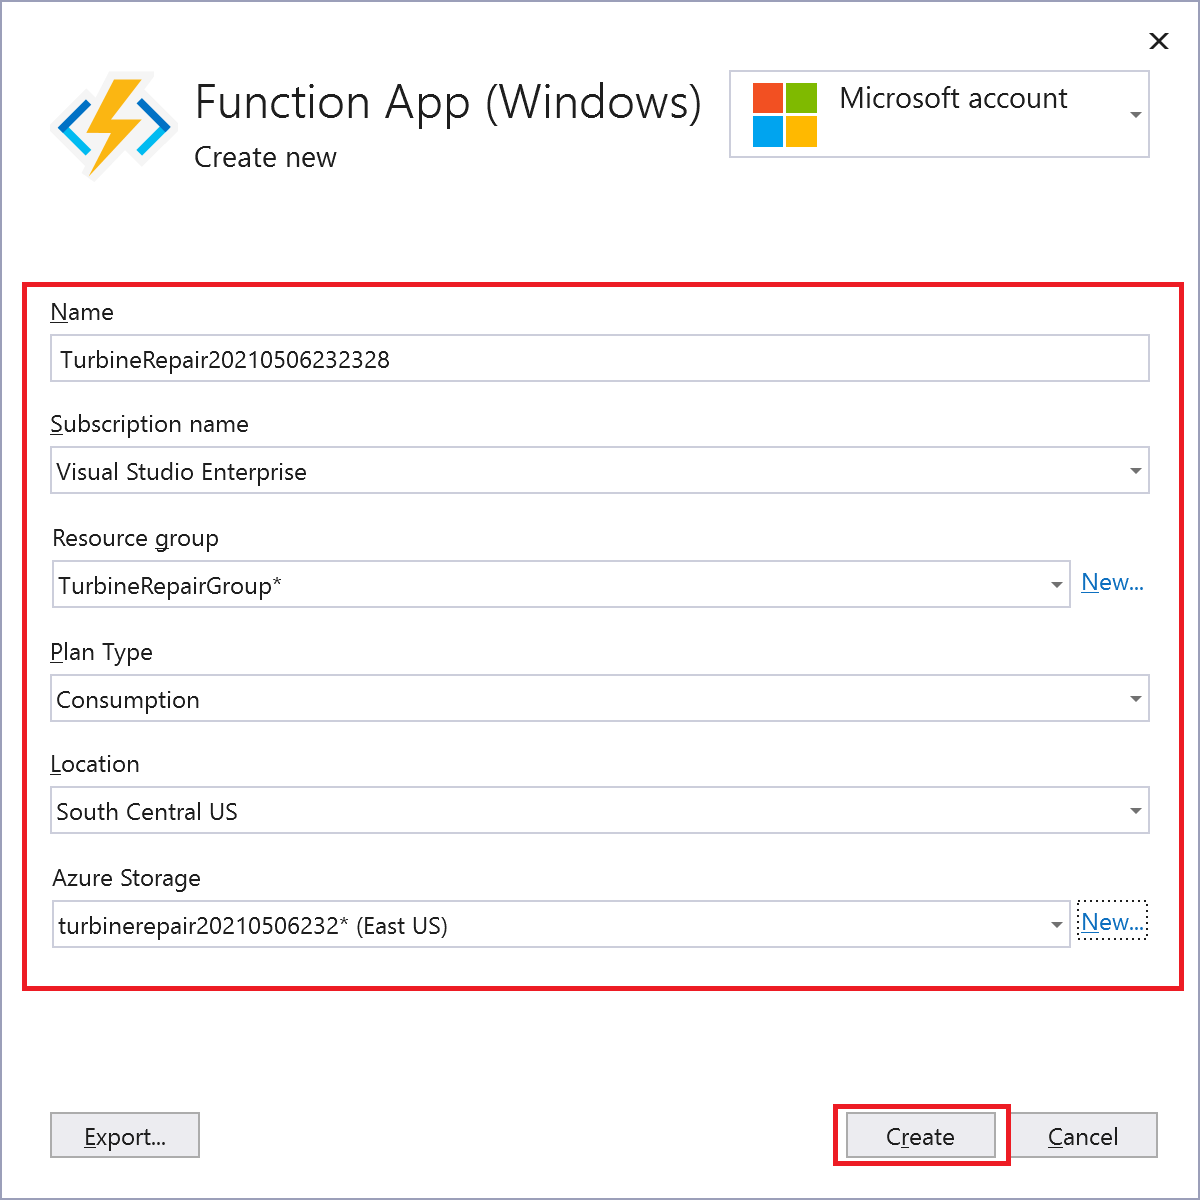 Create a new function app in Azure with Storage